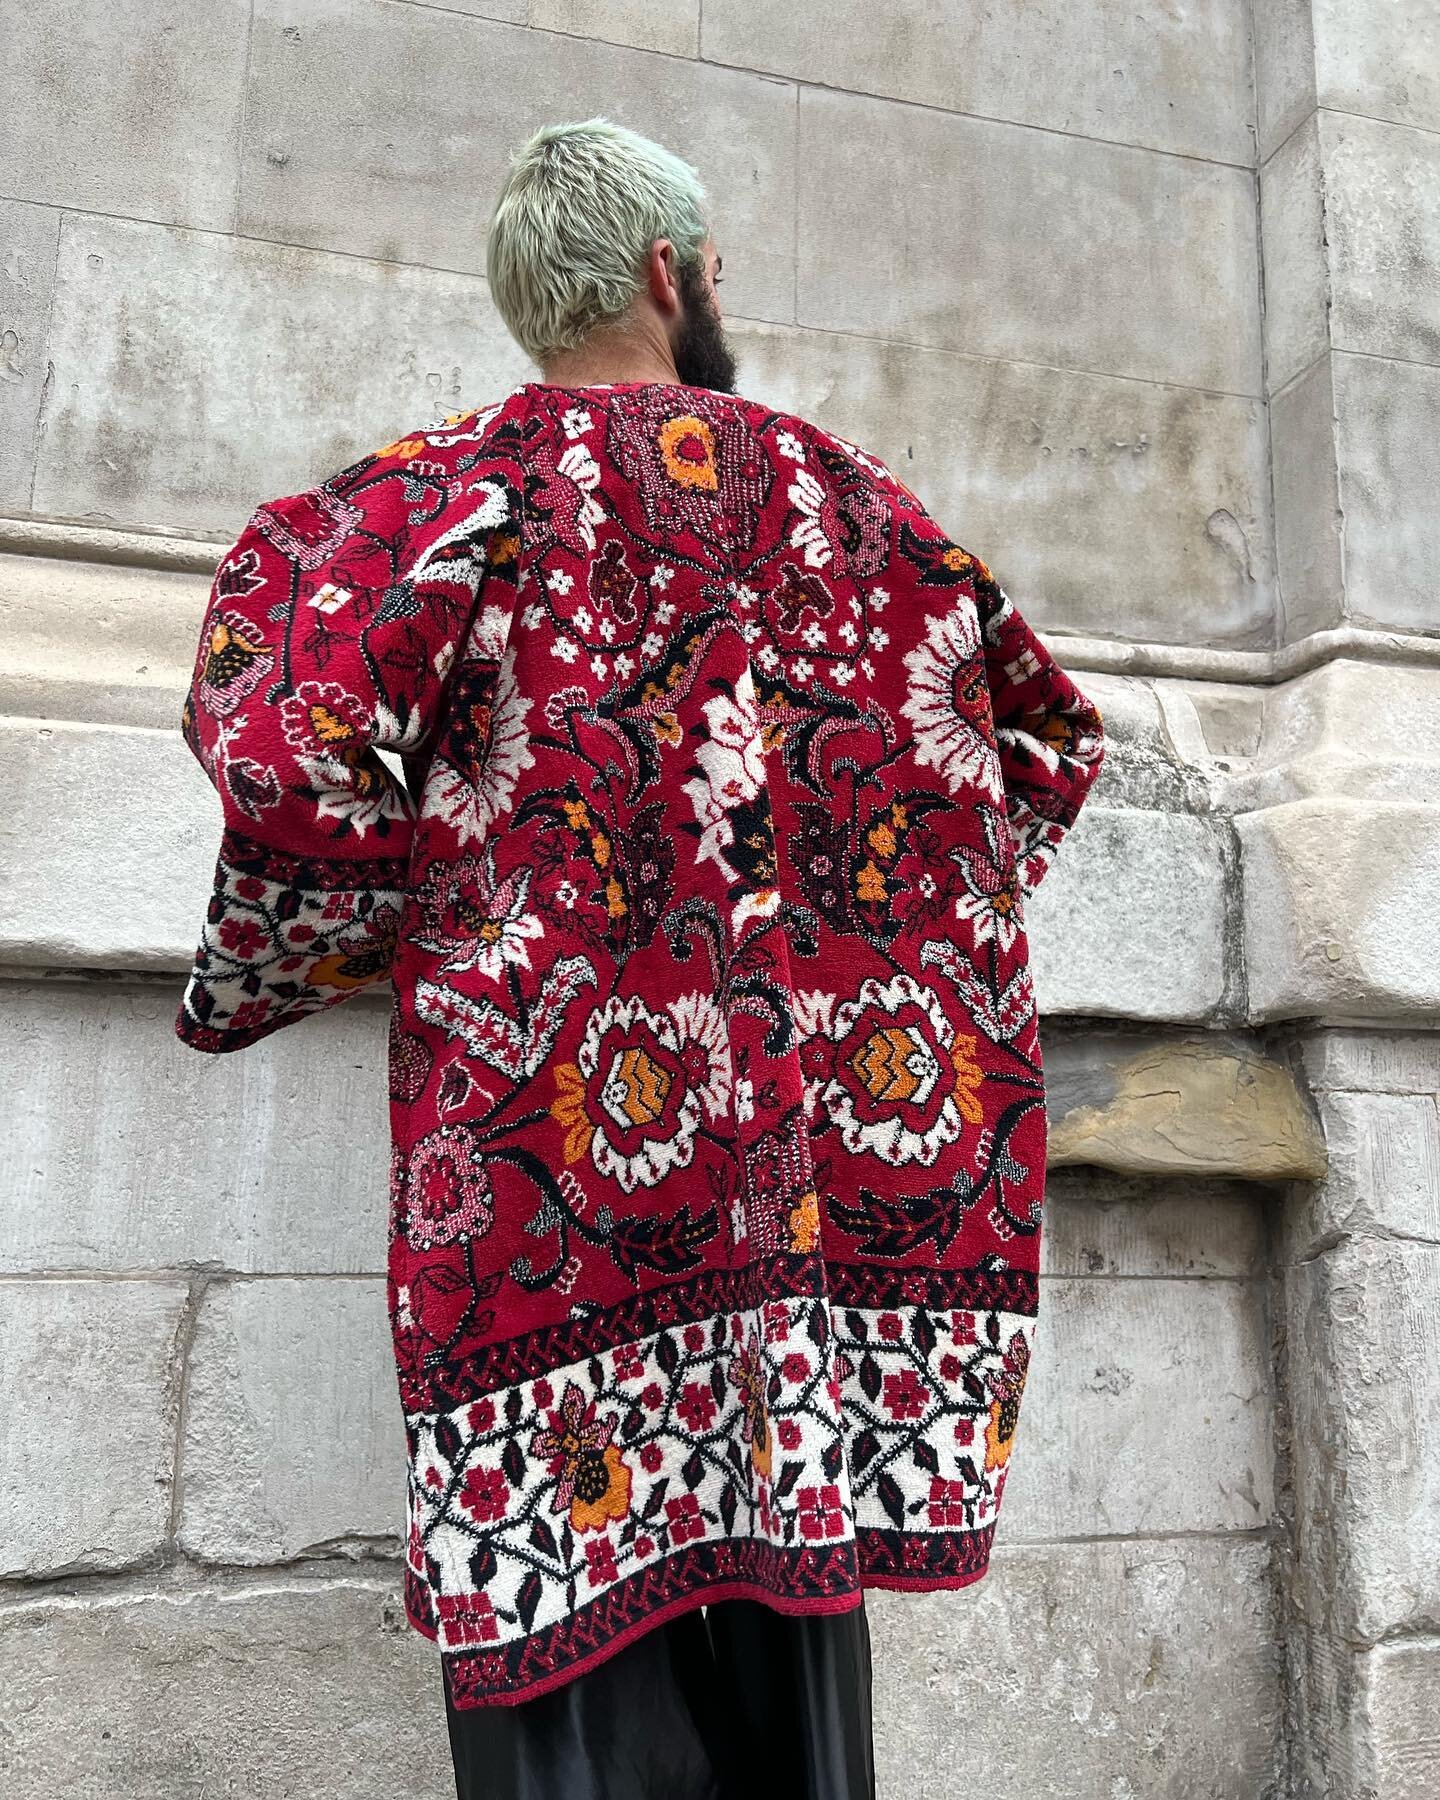 During the London Fashion Week, Vintage Planet will be presentinf the work of our amazing designers! These kimonos were upcycled from heavy jacquard and carpet materials by @mondecoded ❤️ Only at Vintage Planet

@bricklanevintagemarket

#upcycled #lf